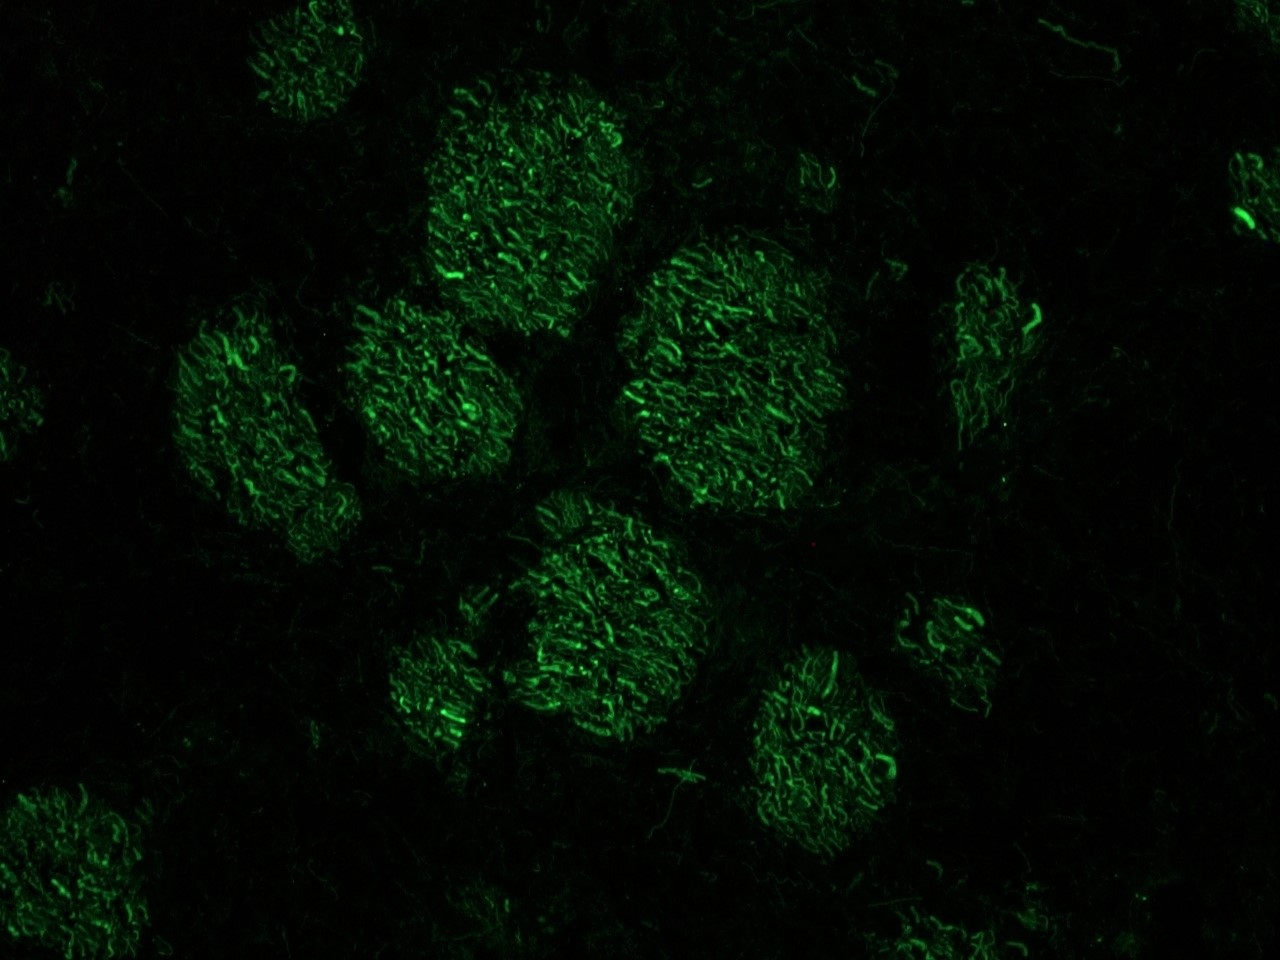 Figure 2. Indirect immunostaining of nerve fibers in a frozen section of rat brain using MUB1305P (clone RNF406) at a 1:100 dilution.